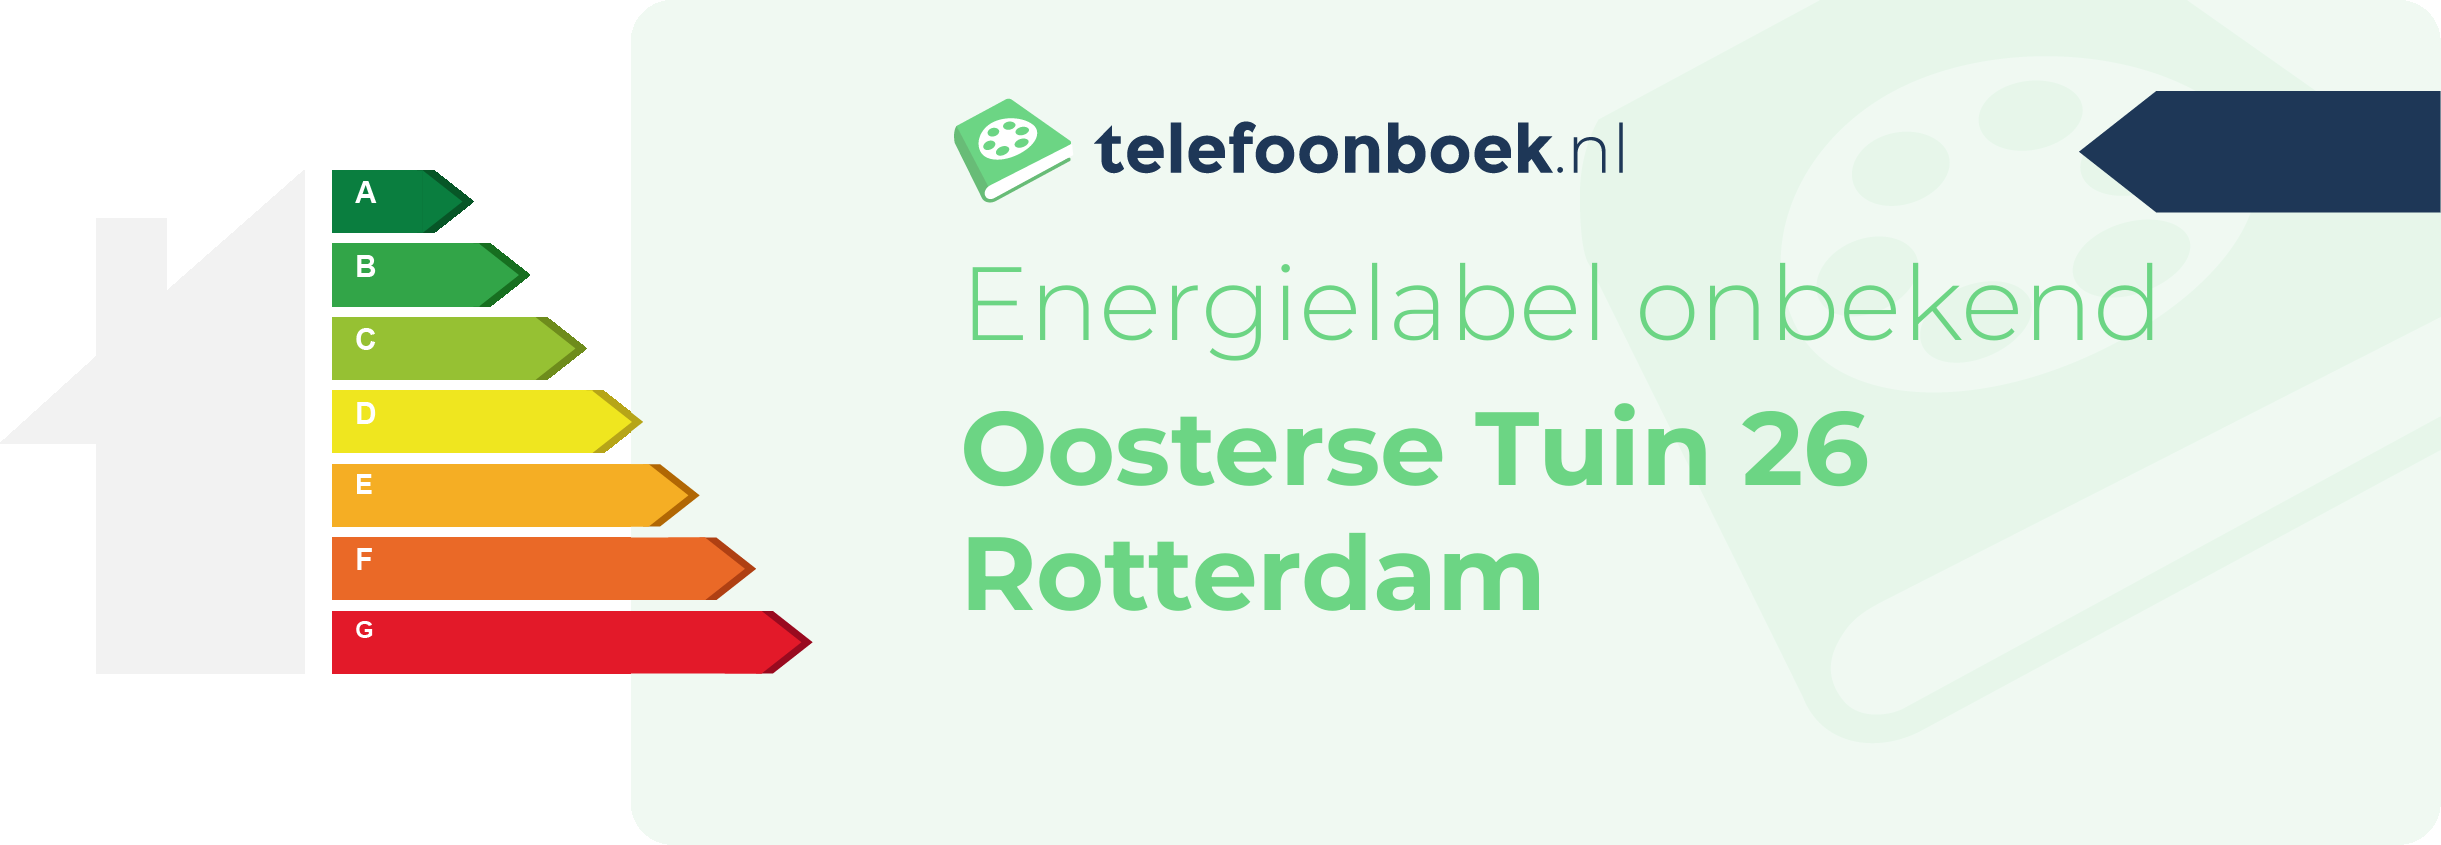 Energielabel Oosterse Tuin 26 Rotterdam